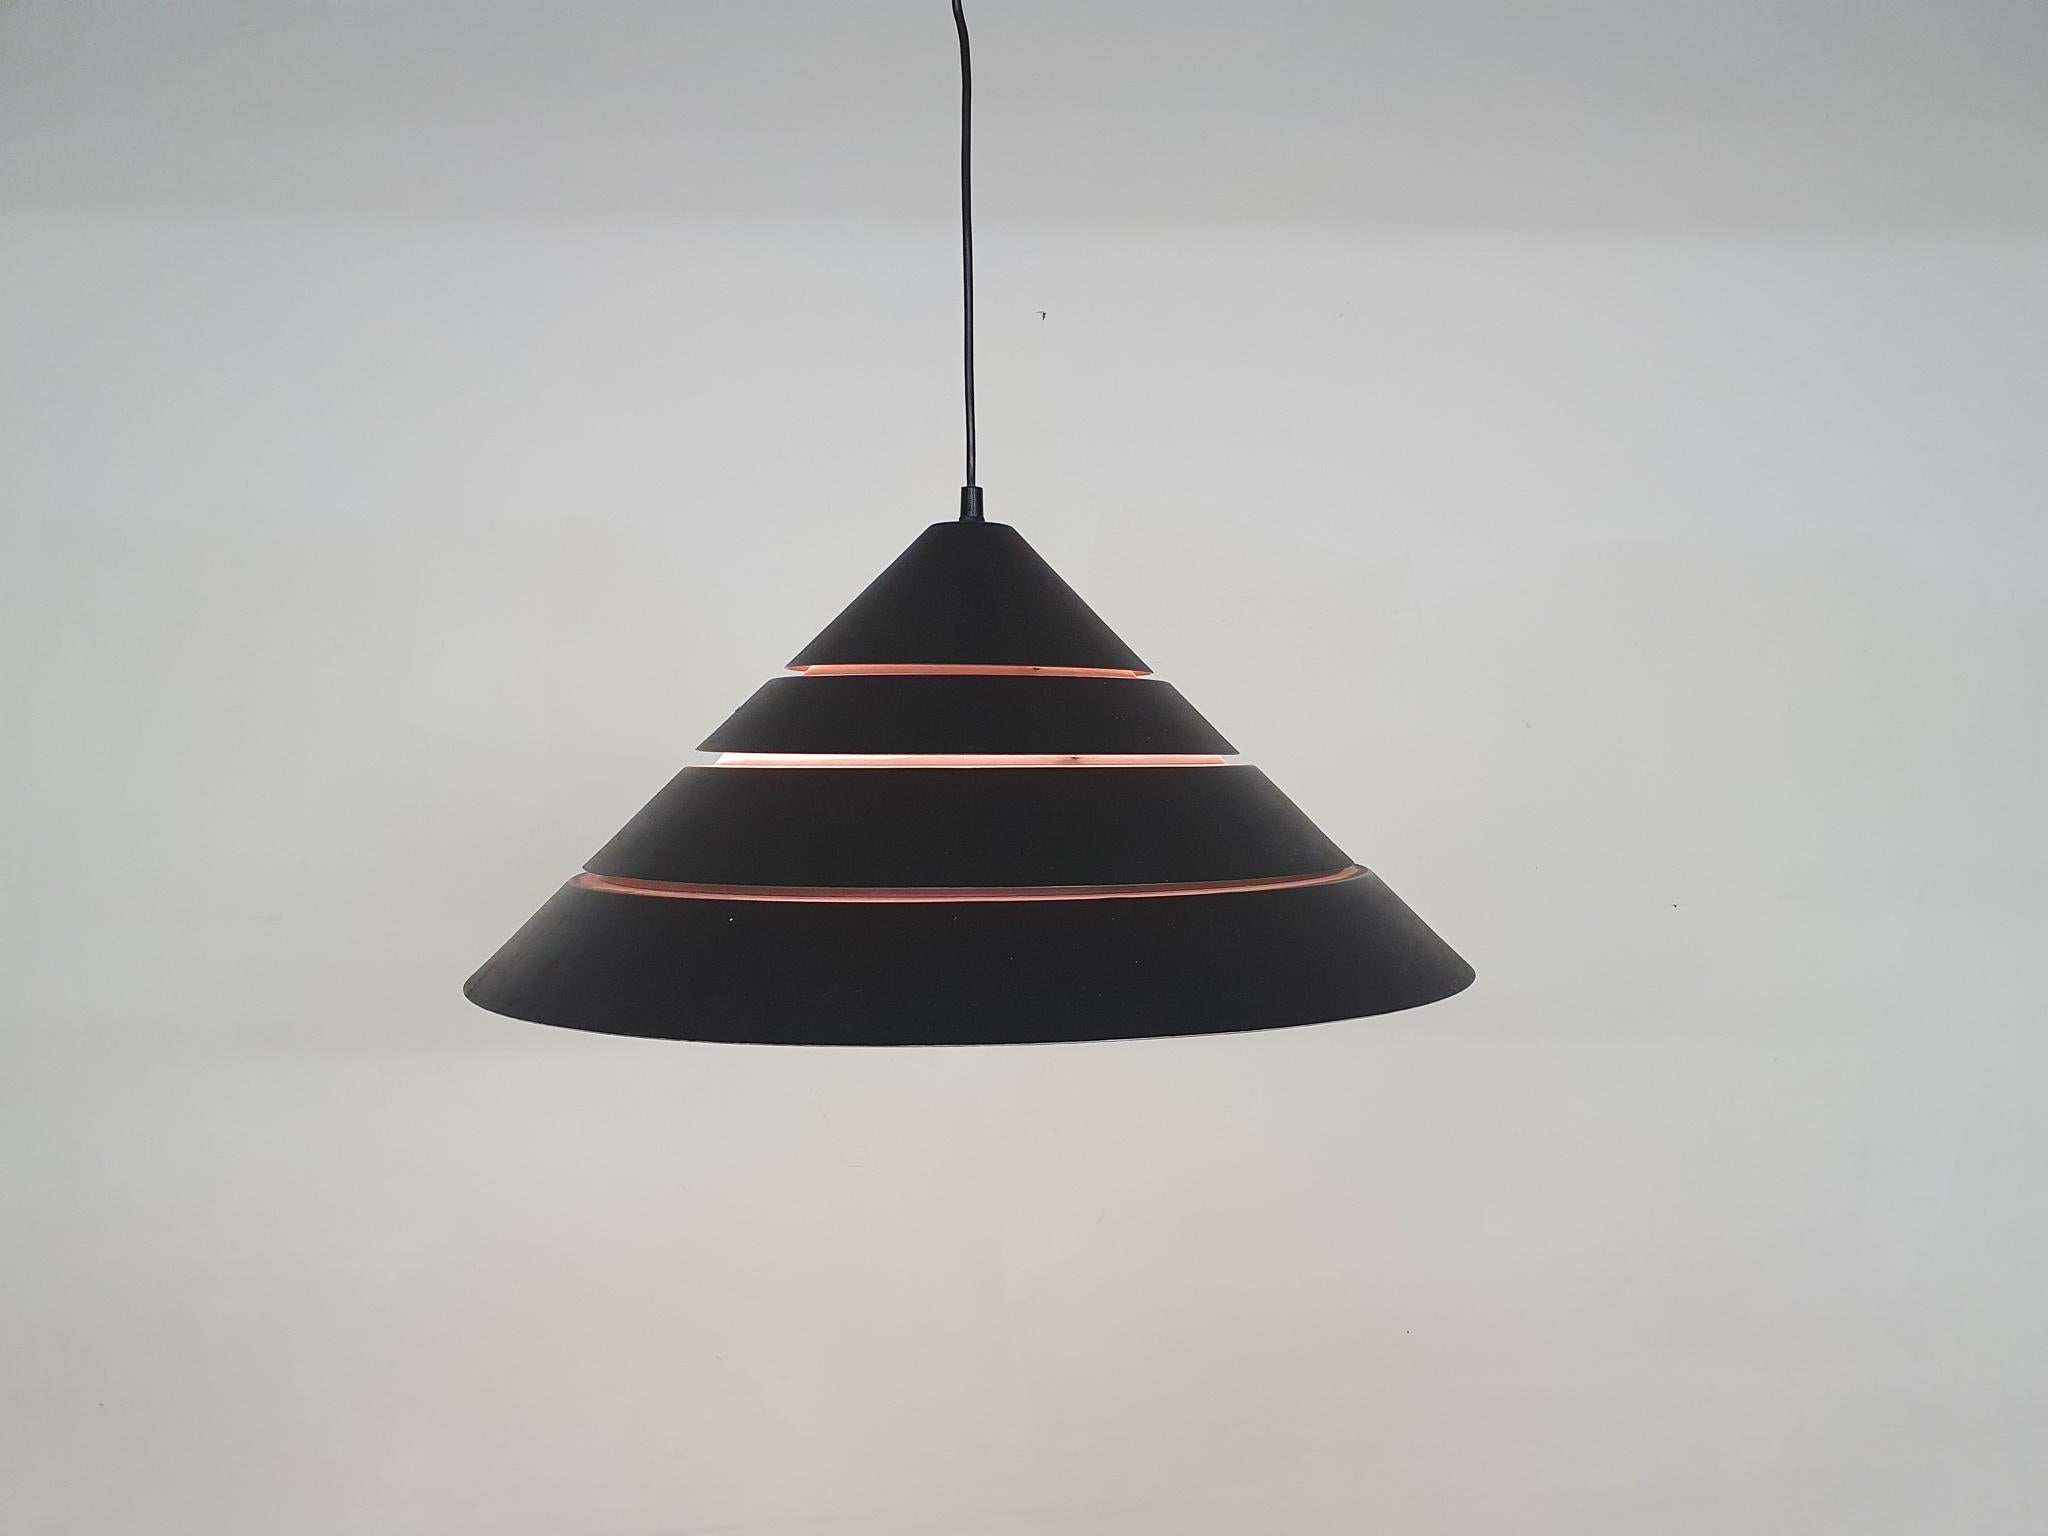 Black metal pendant light by Hans Agne Jakobsson. In good vintage condition.

Hans-Agne Jakobsson was a Swedish interior designer famous for his organic lightning designs. Many of his work follows the approaches of other famous designers like Poul